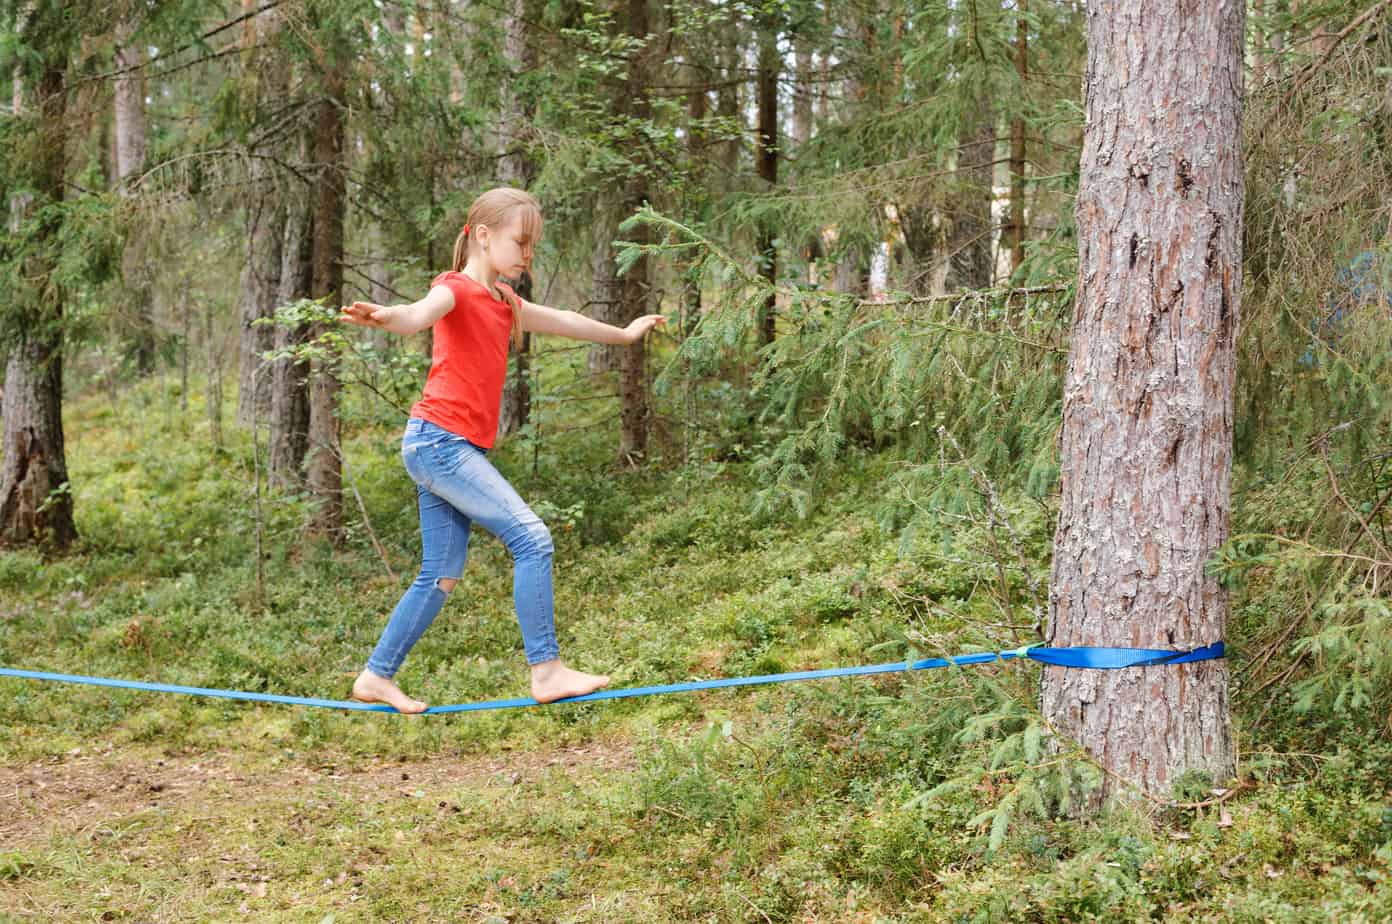 Slacklining For Kids Is Fun And Healthy